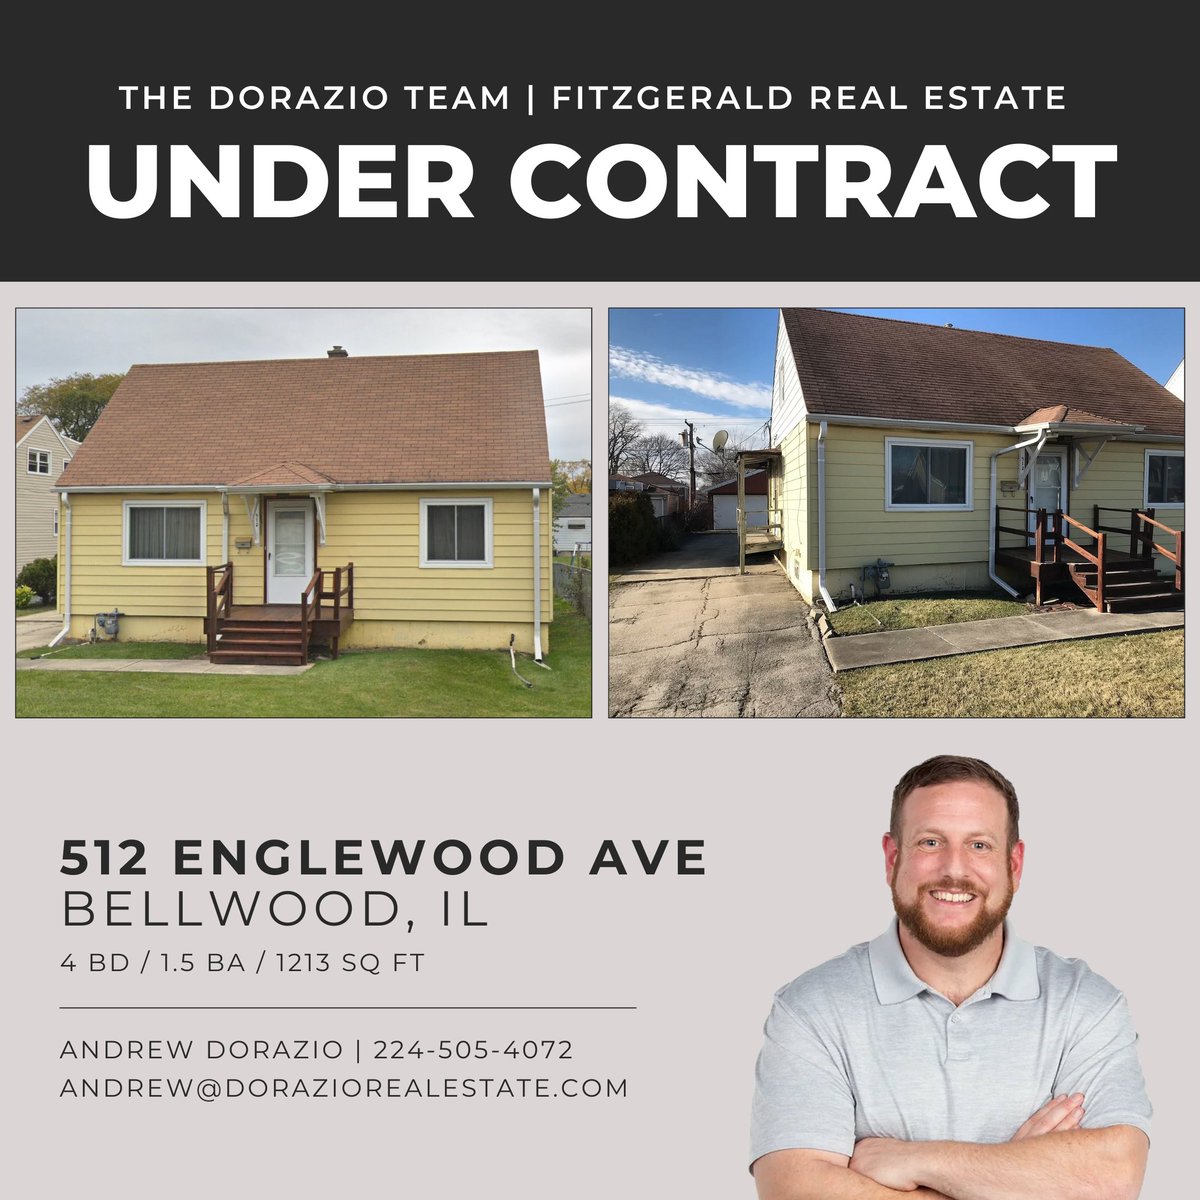 Got a great group or partners under contract on a #fixandflip / #reno project in #bellwood. Interested to watch the progression and see the final product!

#doraziorealestate #dorazioteam #fixandflip #investmentproperty #renovationproject  #houseflipping #realestateinvesting